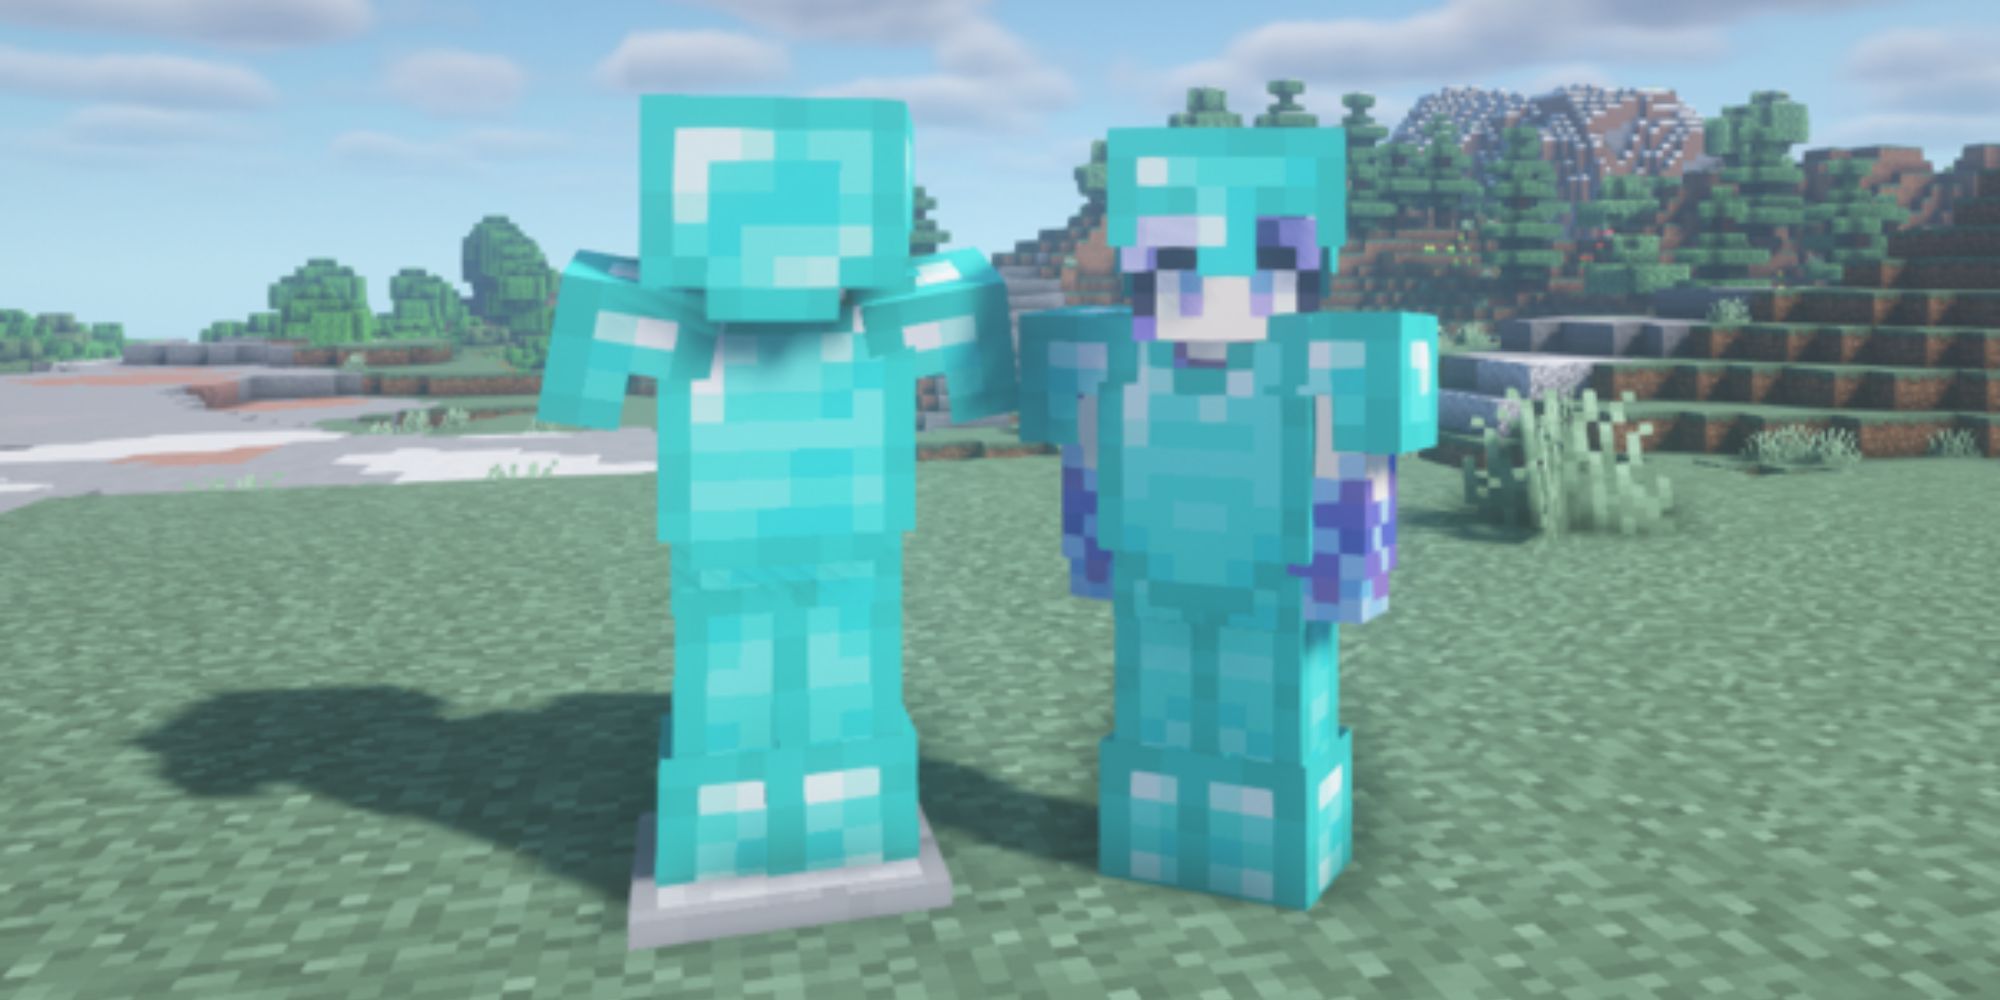 Minecraft Diamond Armor Set on character and mannequin side by side